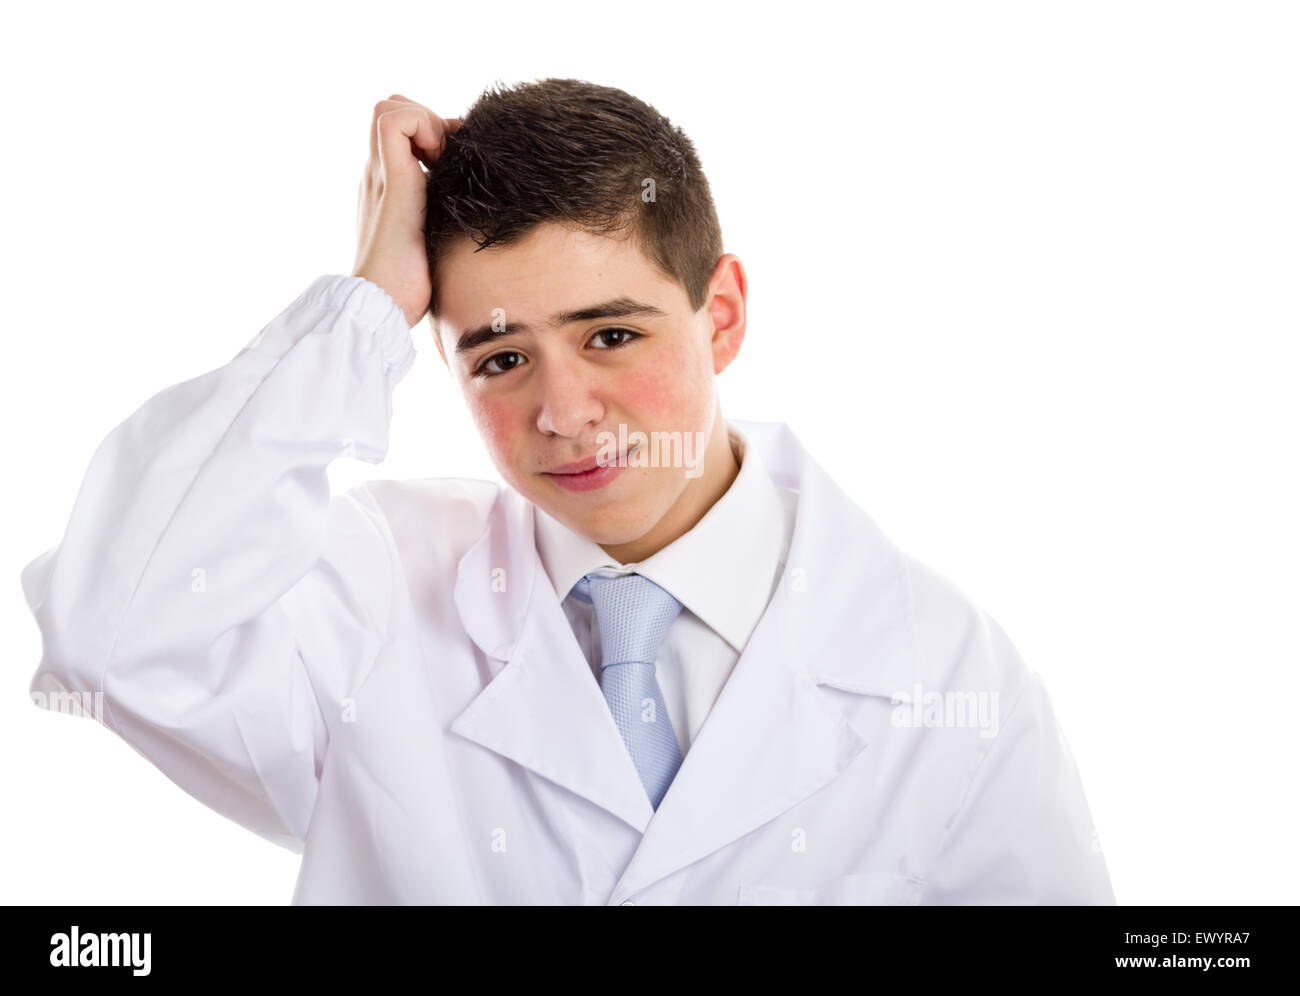 A boy doctor in white coat and blue tie helps to feel medicine more friendly: he is smiling while holding his head. His acne skin has not ben retouched Stock Photo